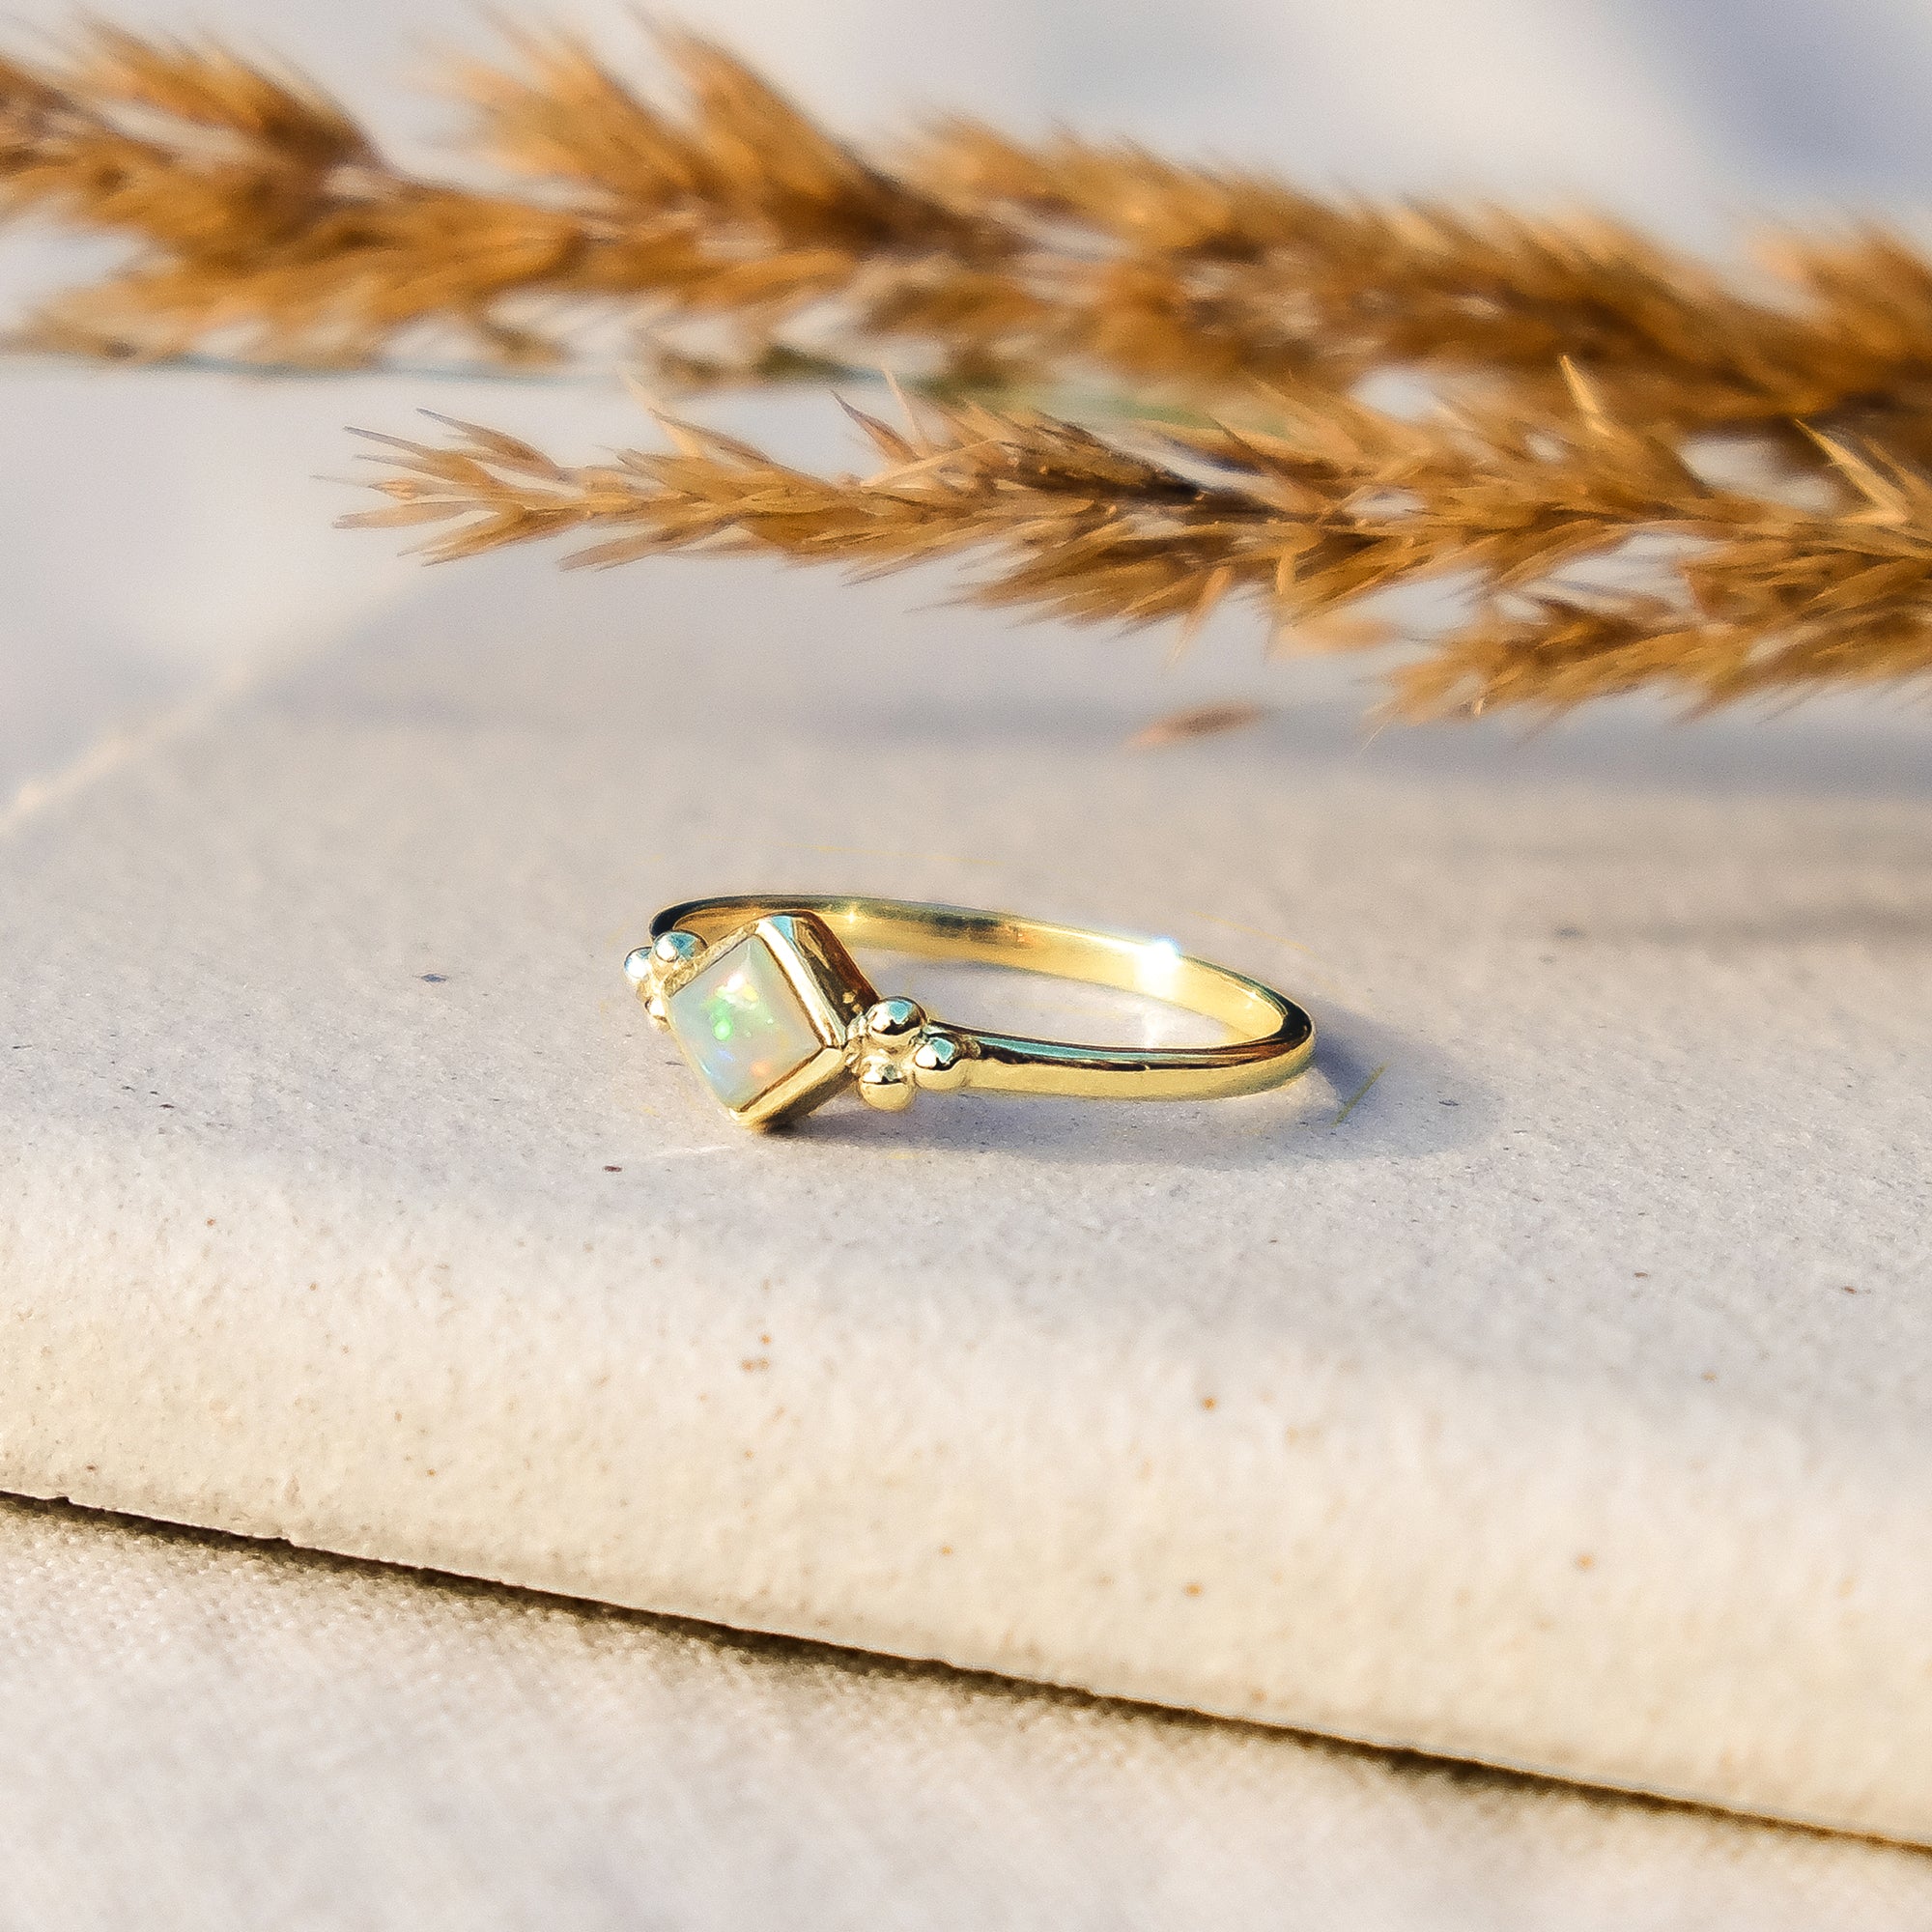 Gold Vermeil Ring, Opal Stacking Ring, October Birthstone